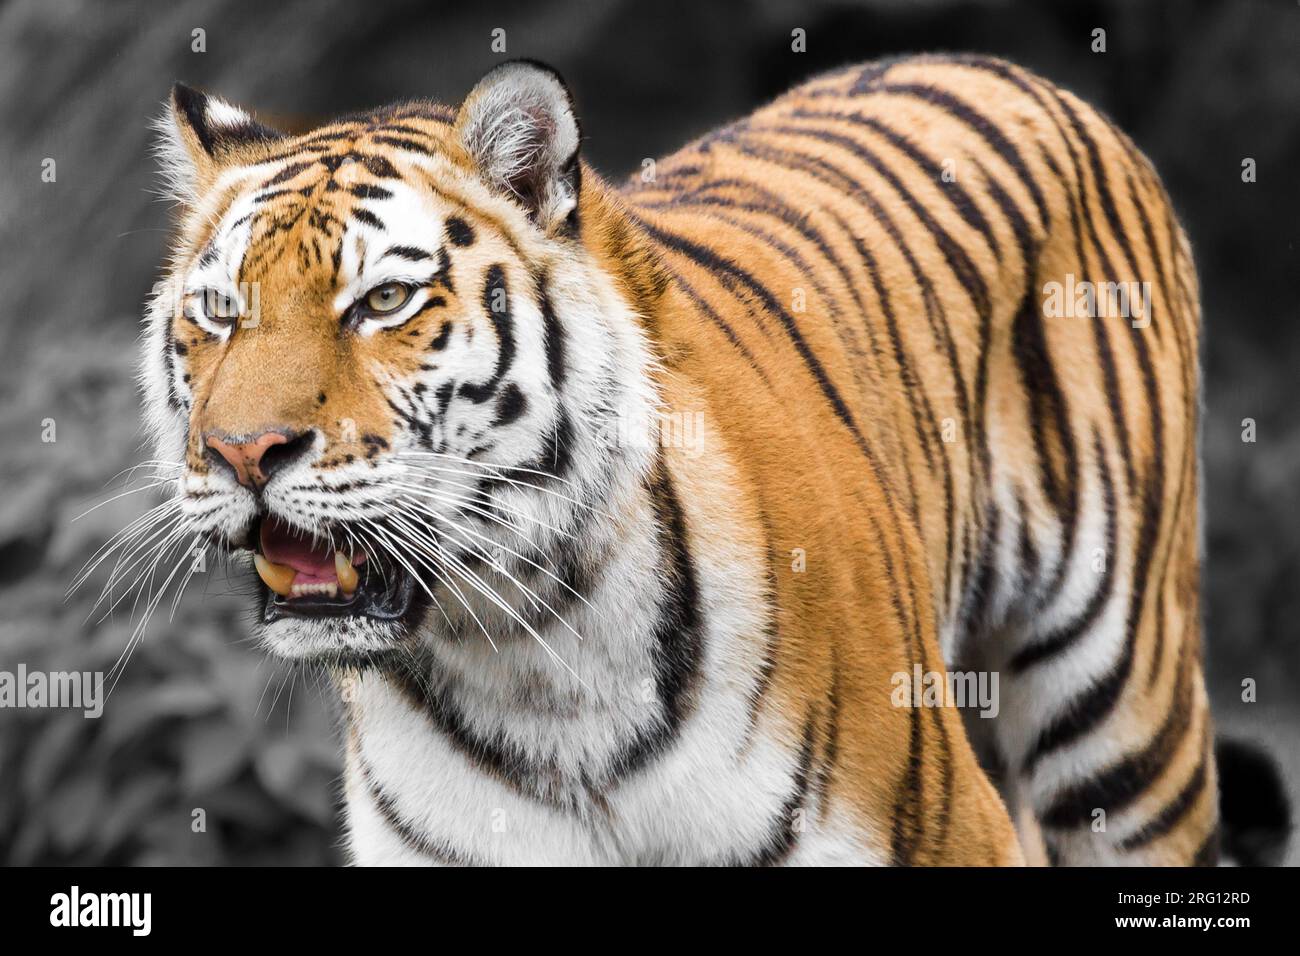 Tiger in a Zoo Stock Photo